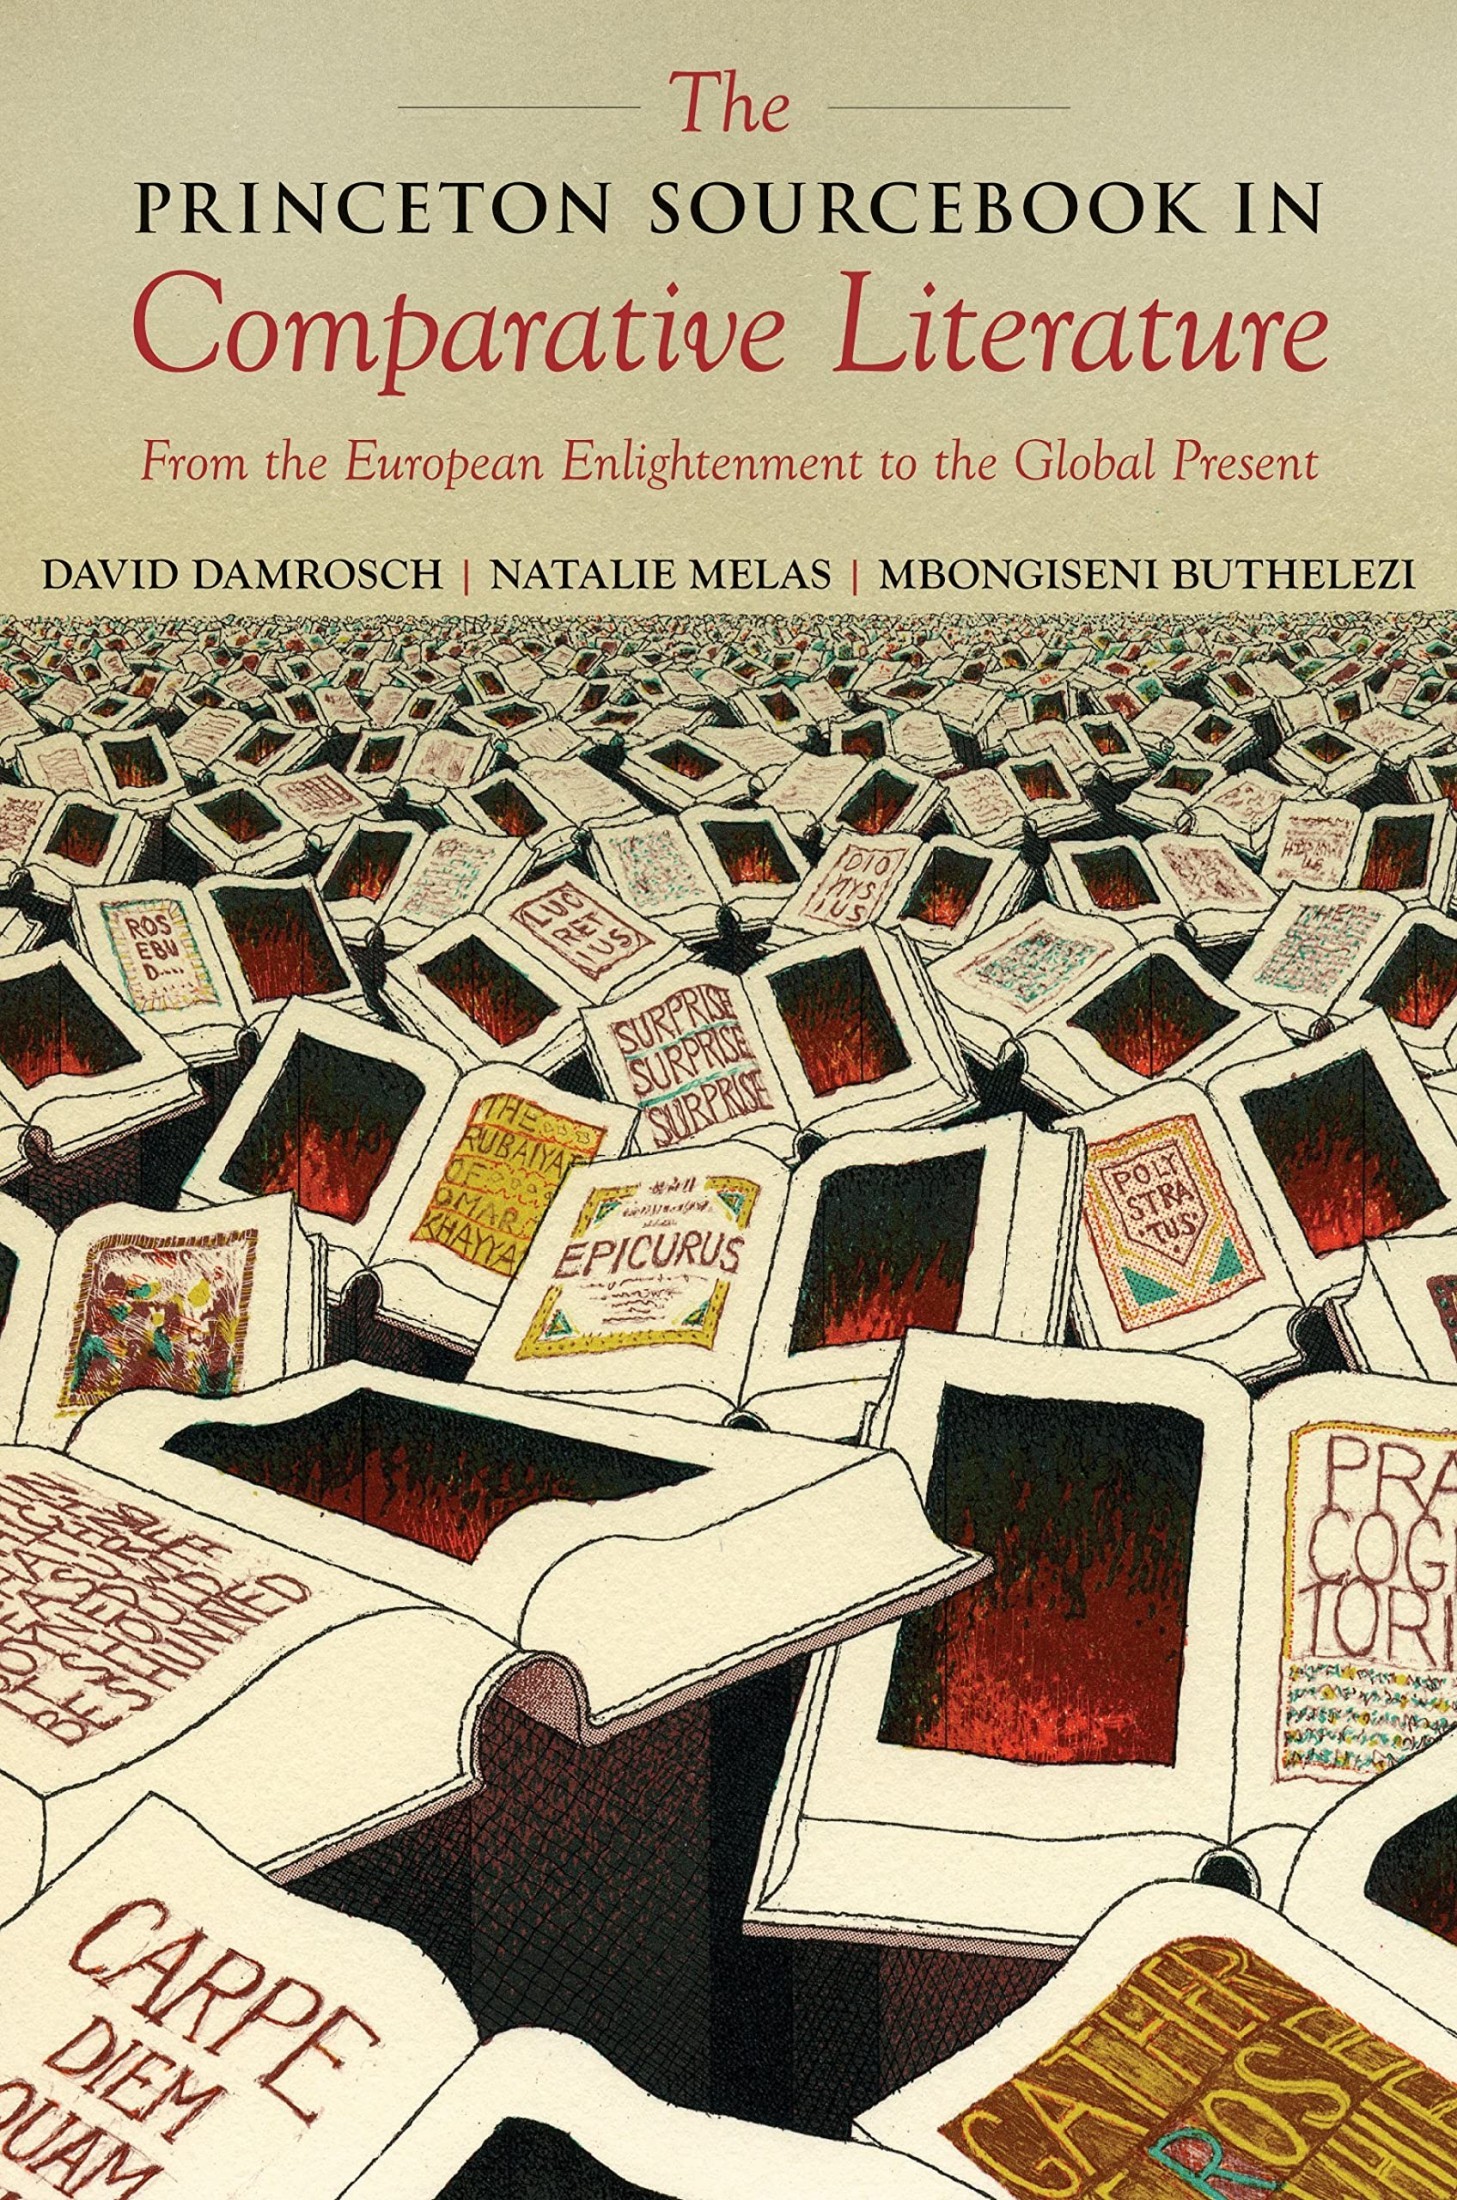 The Princeton Sourcebook in Comparative Literature: From the European Enlightenment to the Global Present